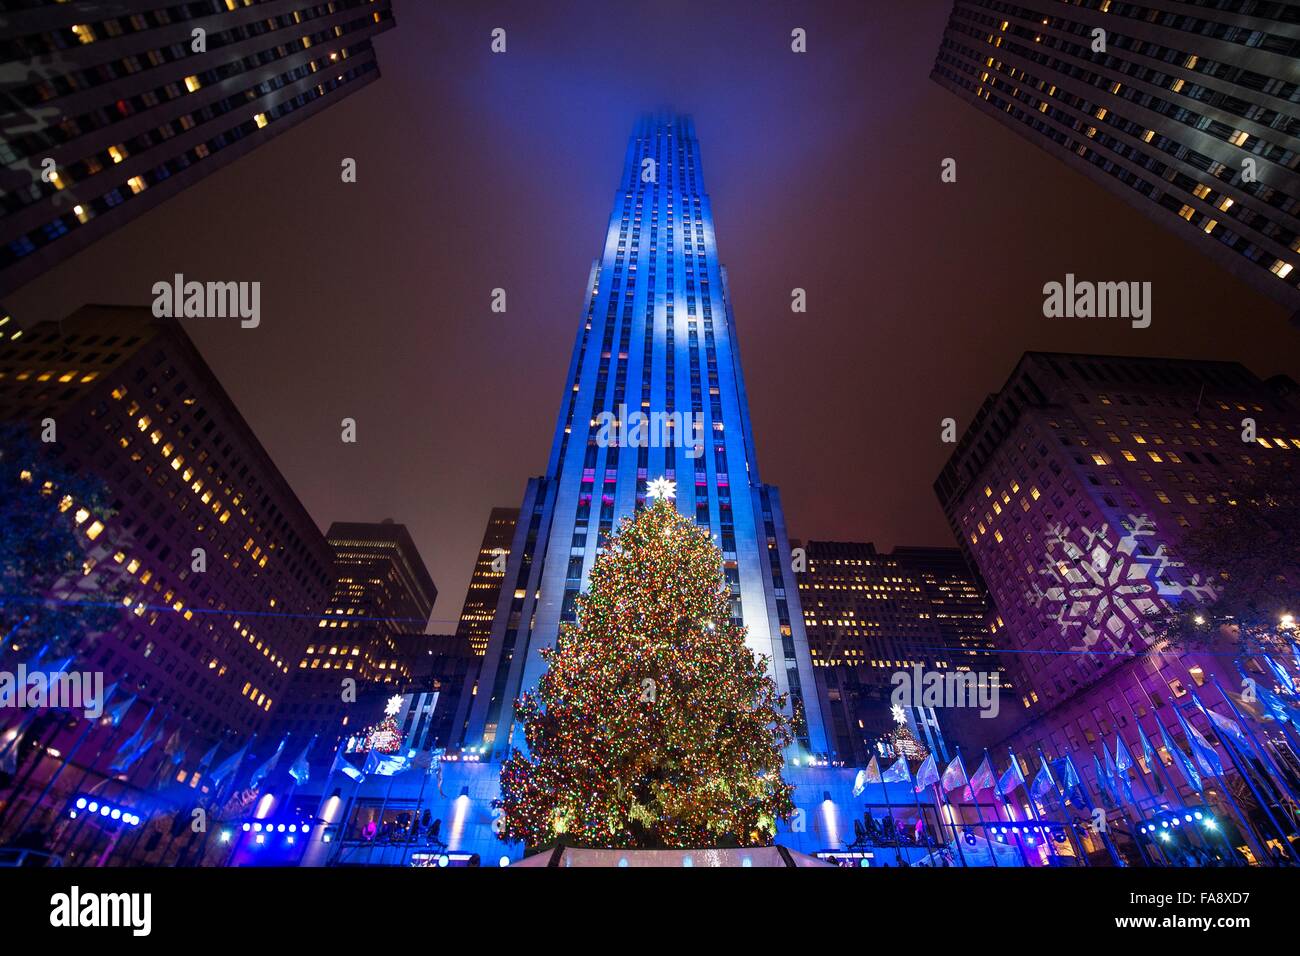 Christmas Tree lighting ceremony at 30 Rock December 2, 2015 New York City, NY. This is the 83rd year of the event which is broadcast live by NBC television. Stock Photo